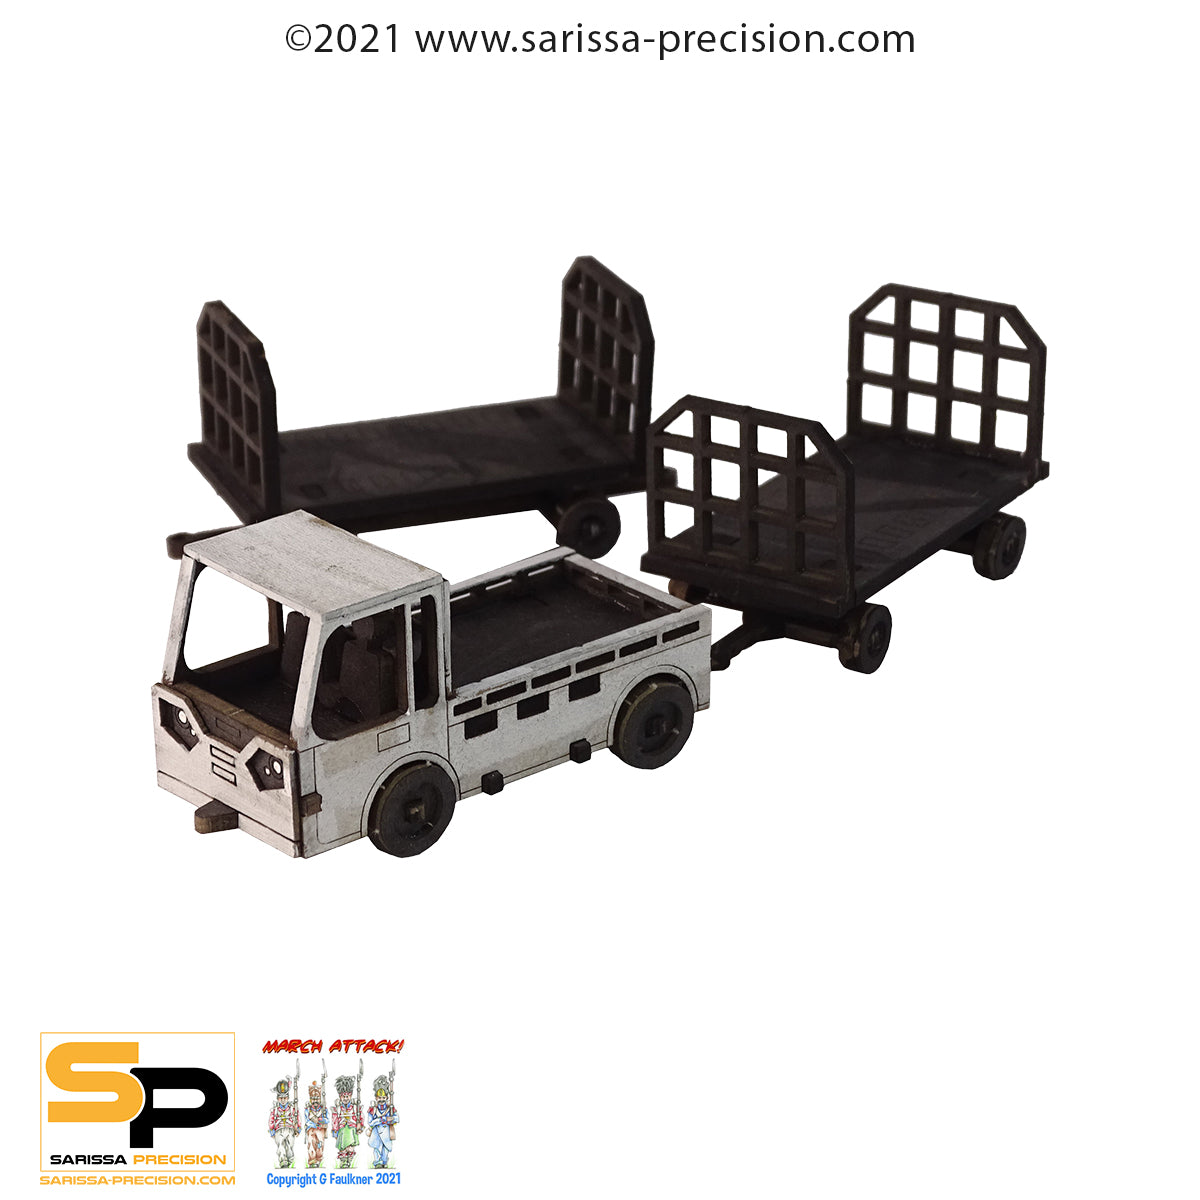 Airport Support - Luggage Tug and Trollies (28mm)